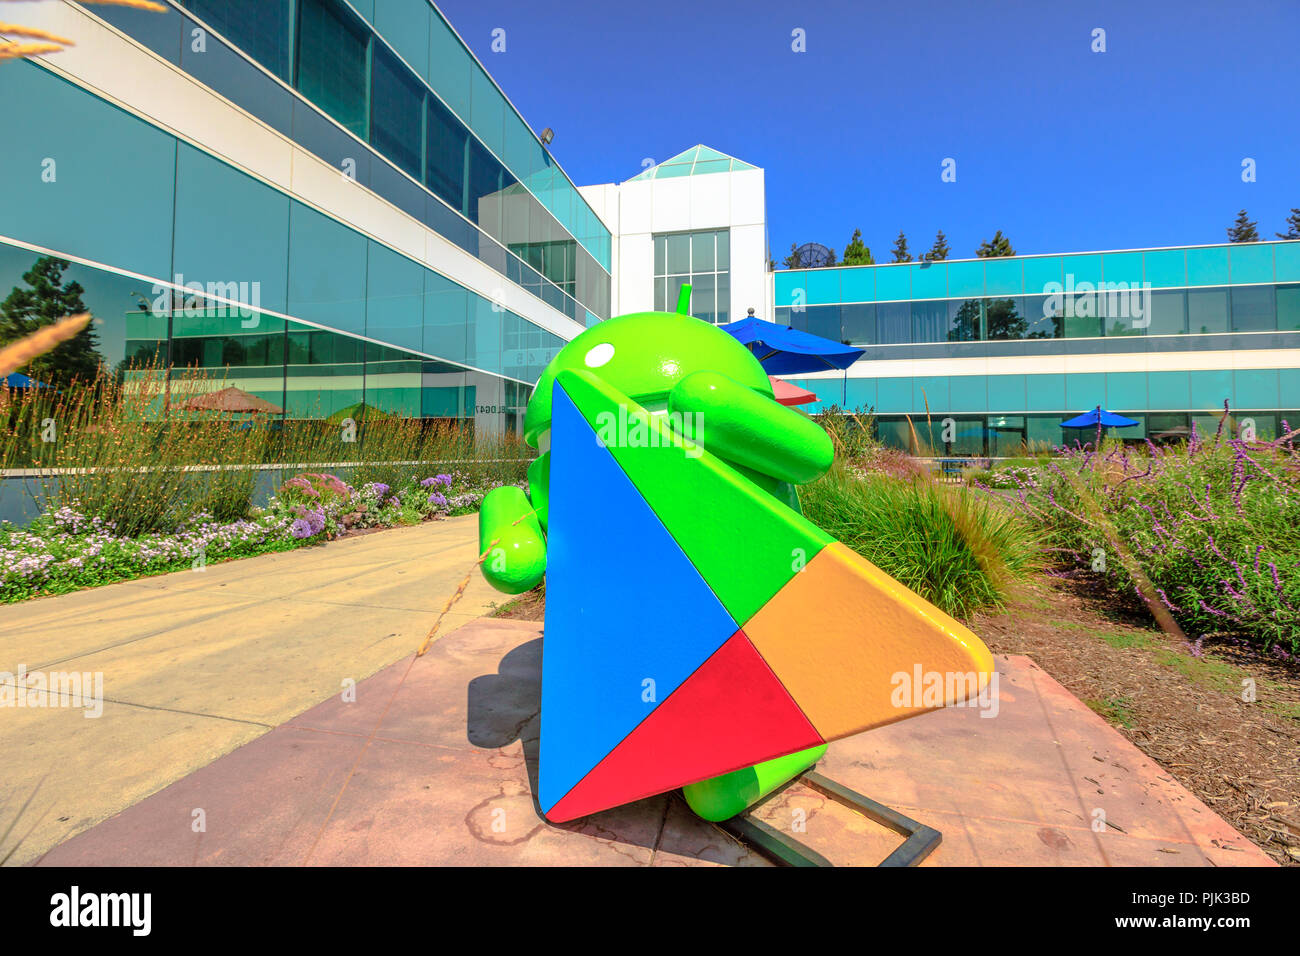 Mountain View, California, United States - August 13, 2018: Google Play Android Nougat statue on foreground at Charleston Campus of Google Headquarters in Silicon Valley near Googleplex. Building 47. Stock Photo